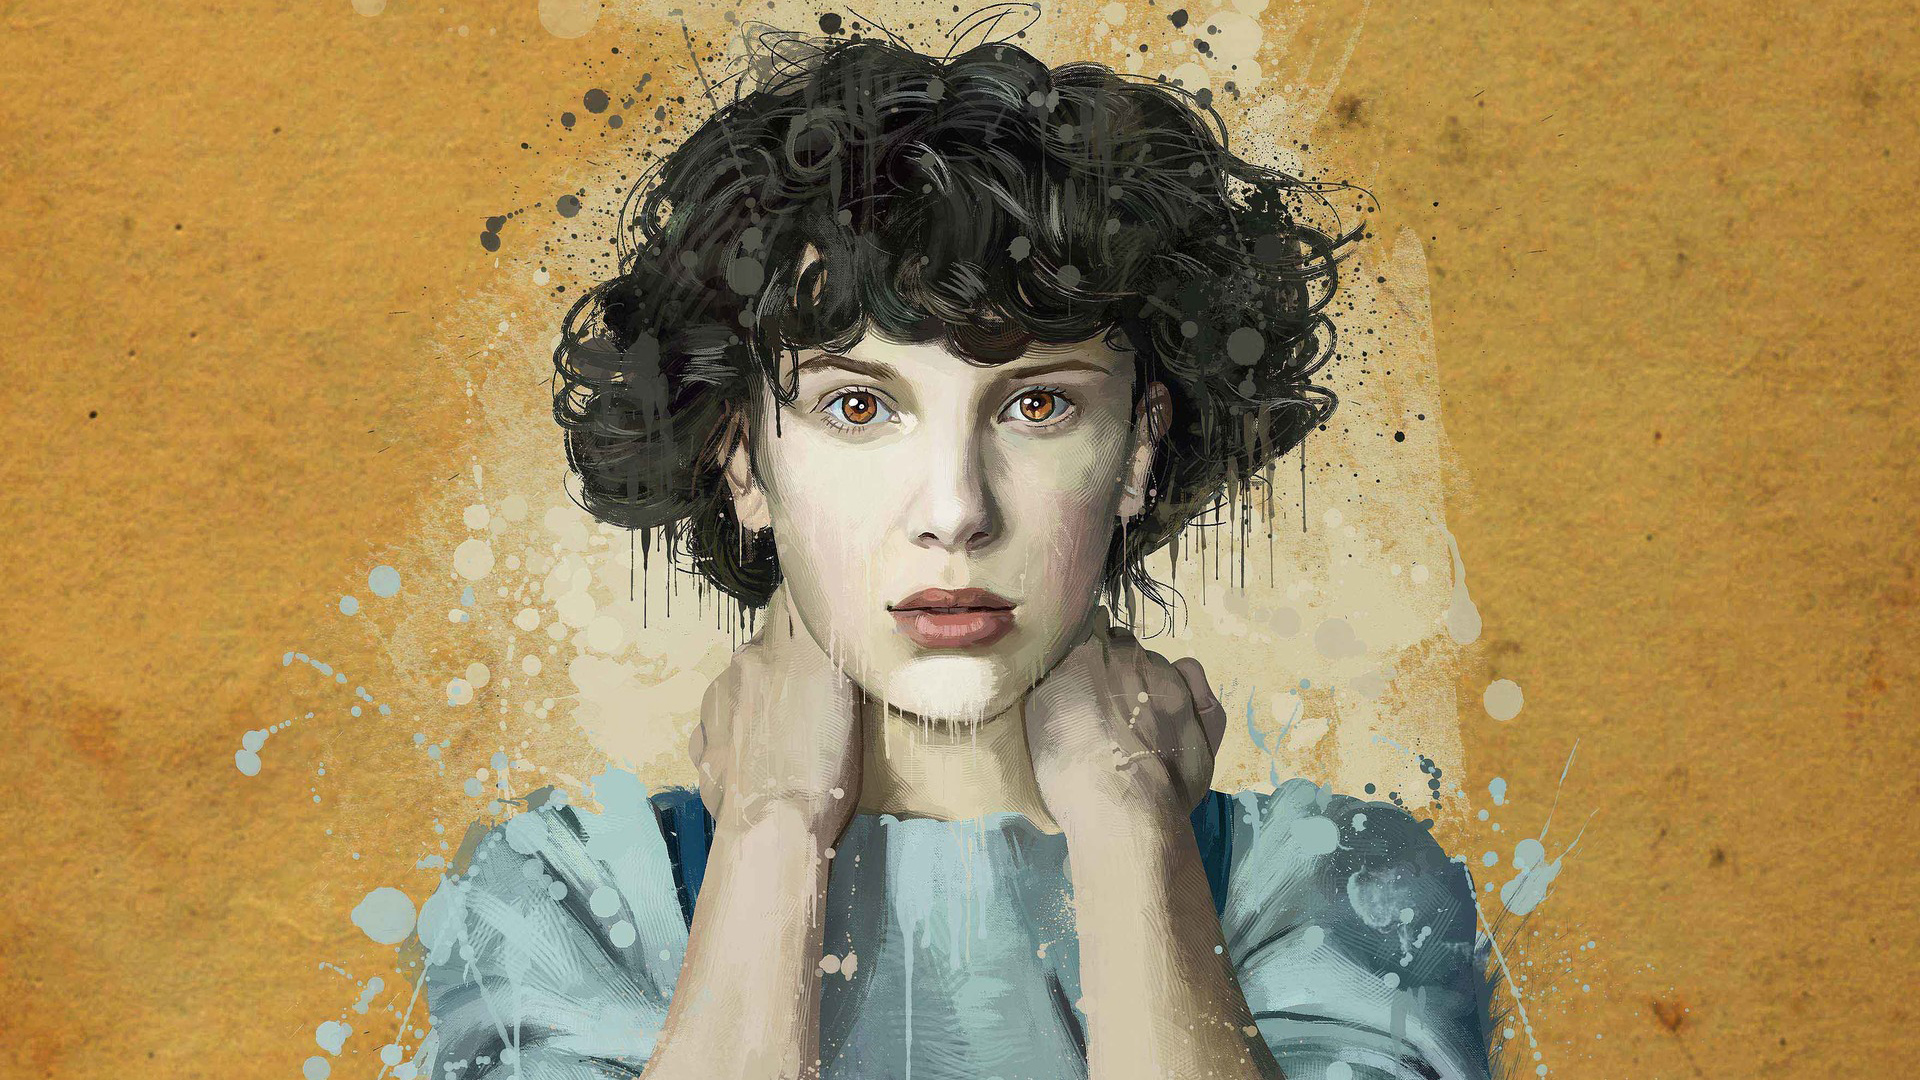 General 1920x1080 Eleven portrait curly hair short hair paint splatter brown eyes yellow background Stranger Things Netflix TV series fan art painting looking at viewer